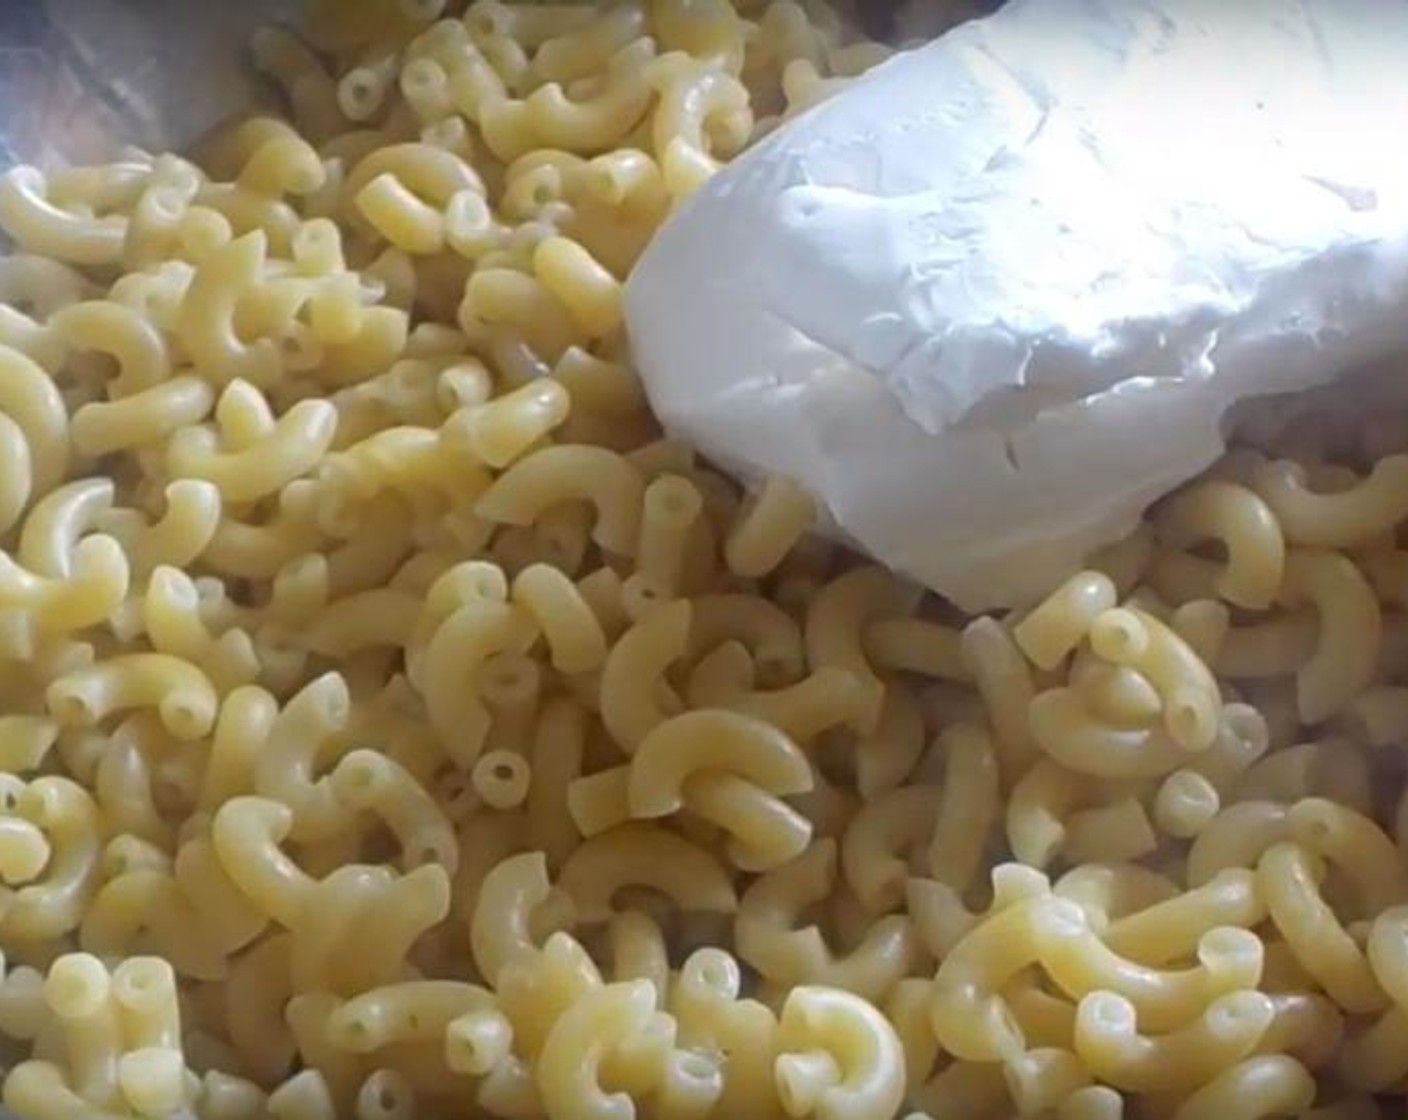 step 2 Into a mixing bowl, add Elbow Macaroni (1 lb), Cream Cheese (1 cup) and Unsalted Butter (1/3 cup). Mix well.